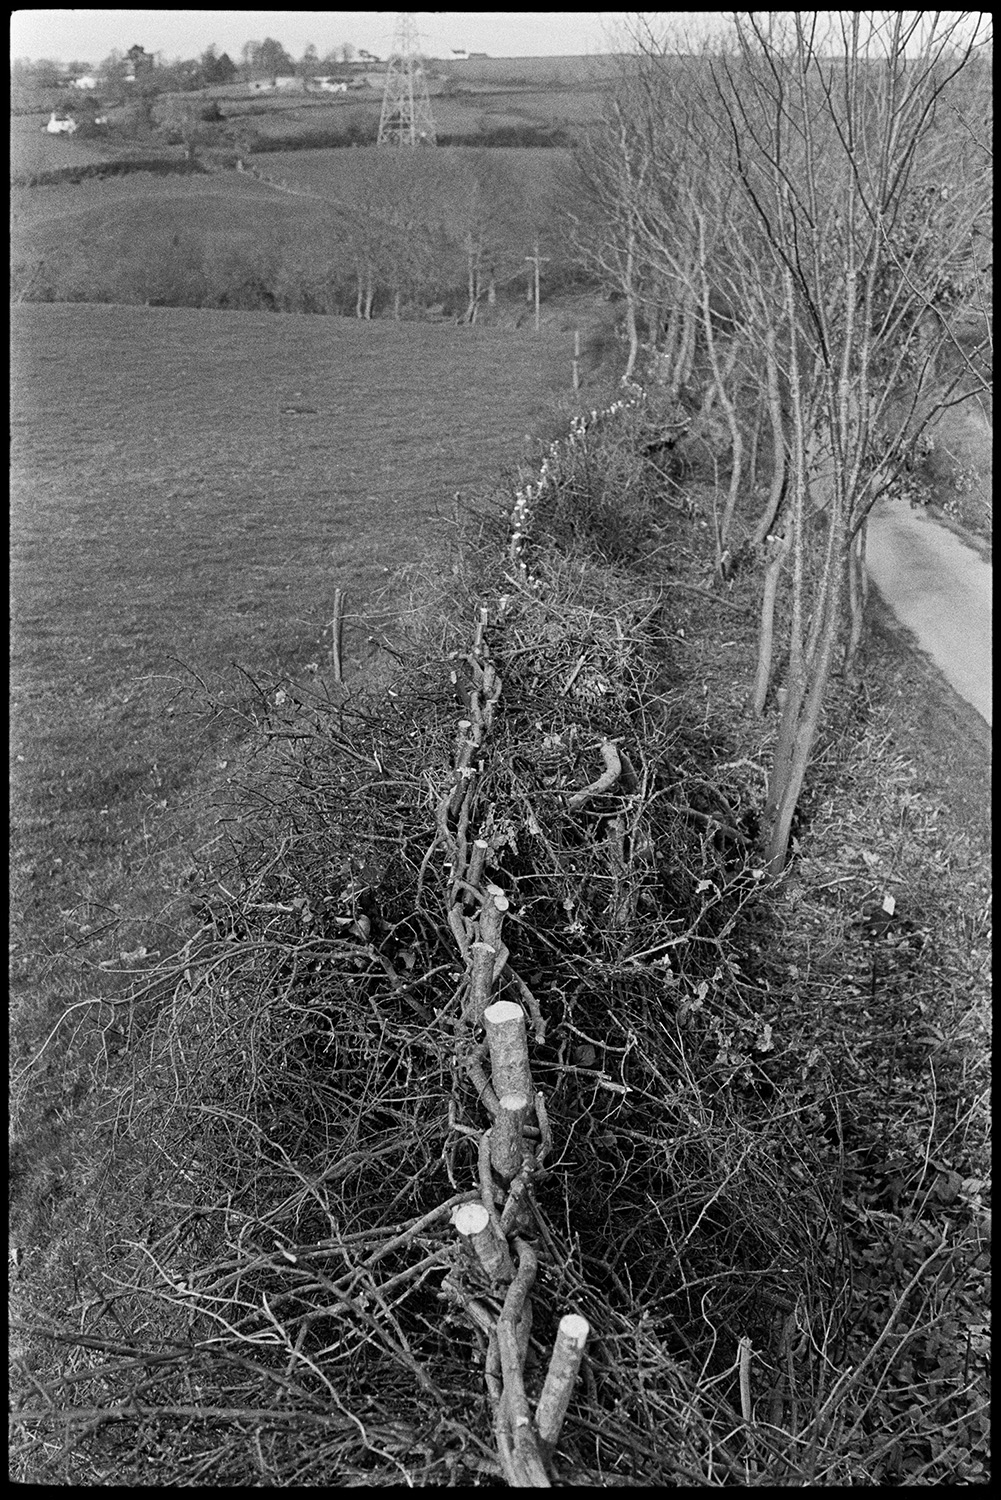 Cut and laid hedge, not in style of Devon hedges.
[A view along a hedge which has been laid in North Devon. Fields, trees and electricity pylons can be seen in the background.]